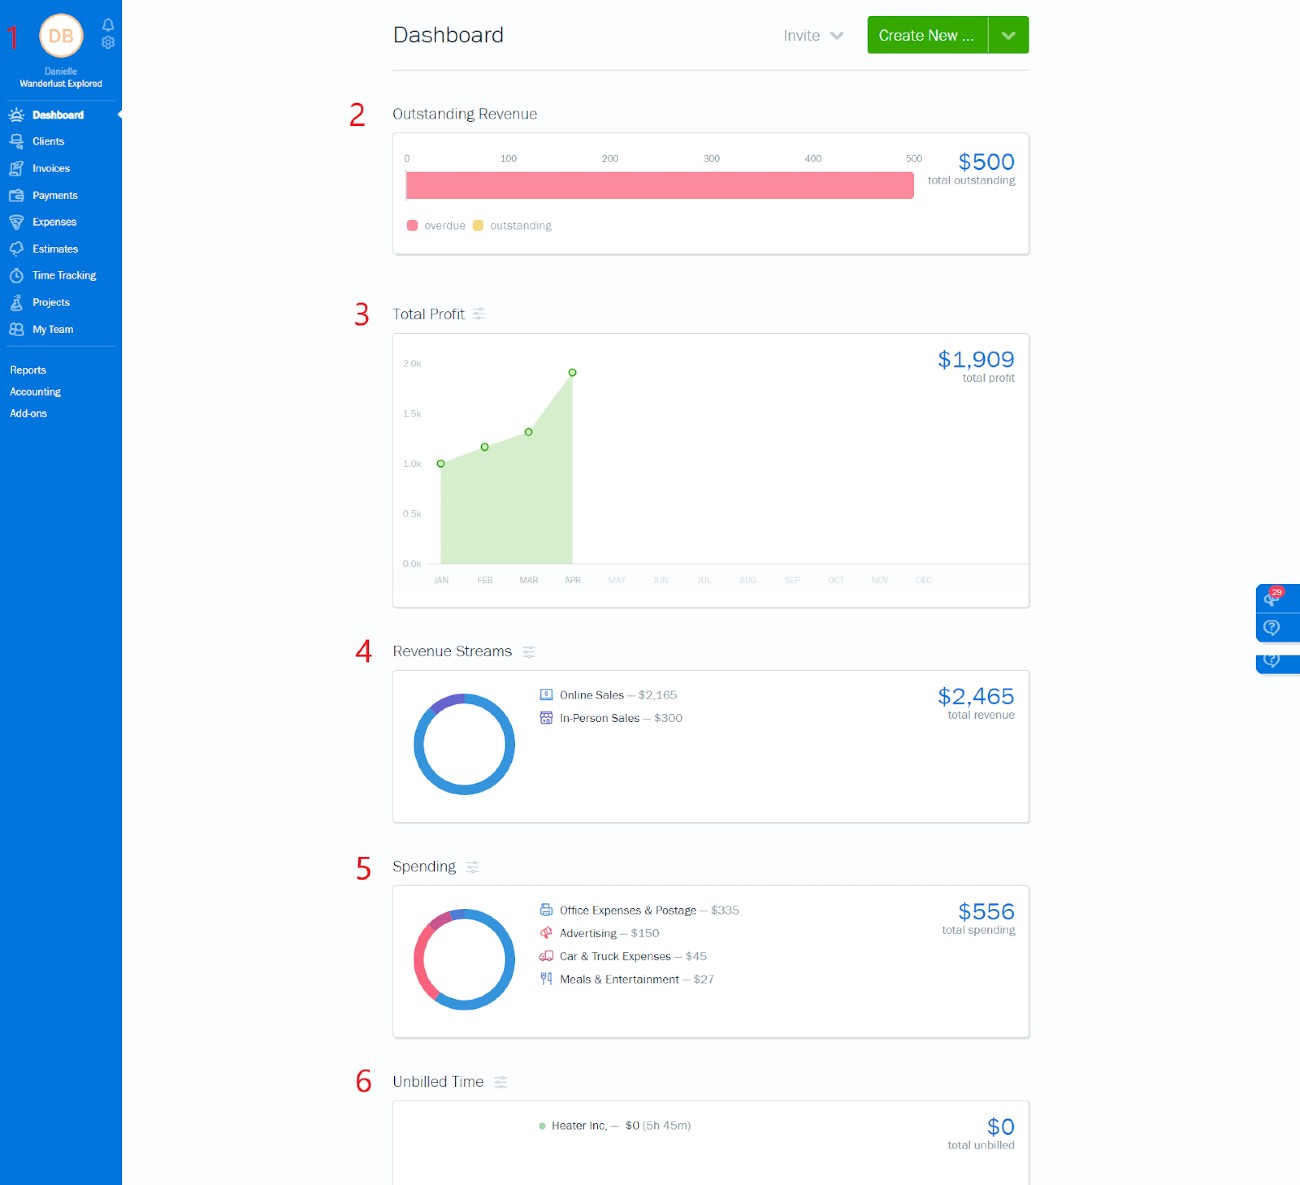 Image of FreshBooks dashboard that shows outstanding revenue, total profit, revenue streams, spending, and unbilled time.